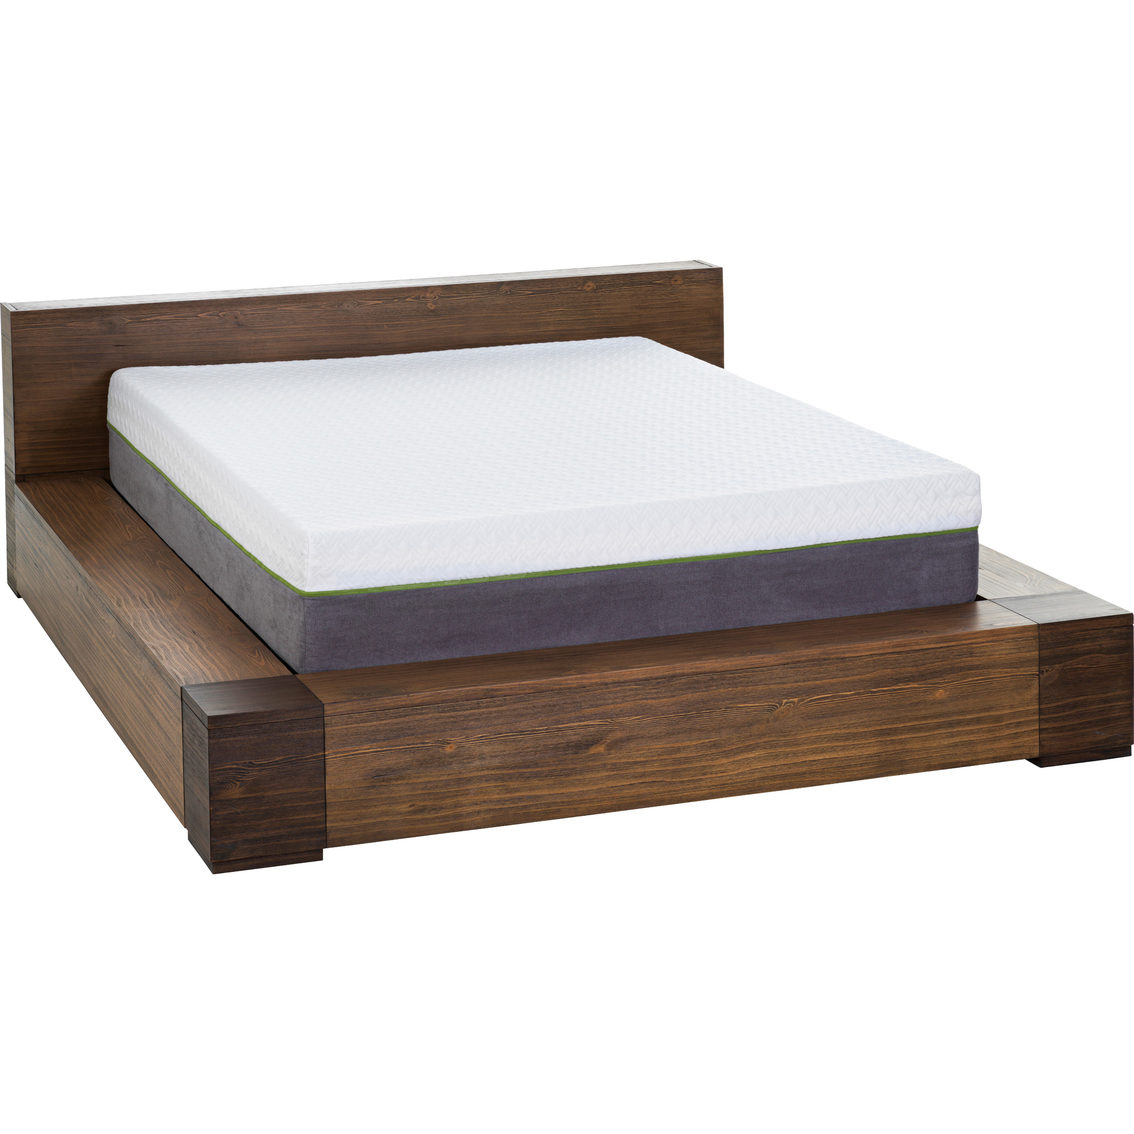 Motion Trend 12 in. Copper Infused Memory Foam Mattress with M4000 Adjustable Base - Image 3 of 6